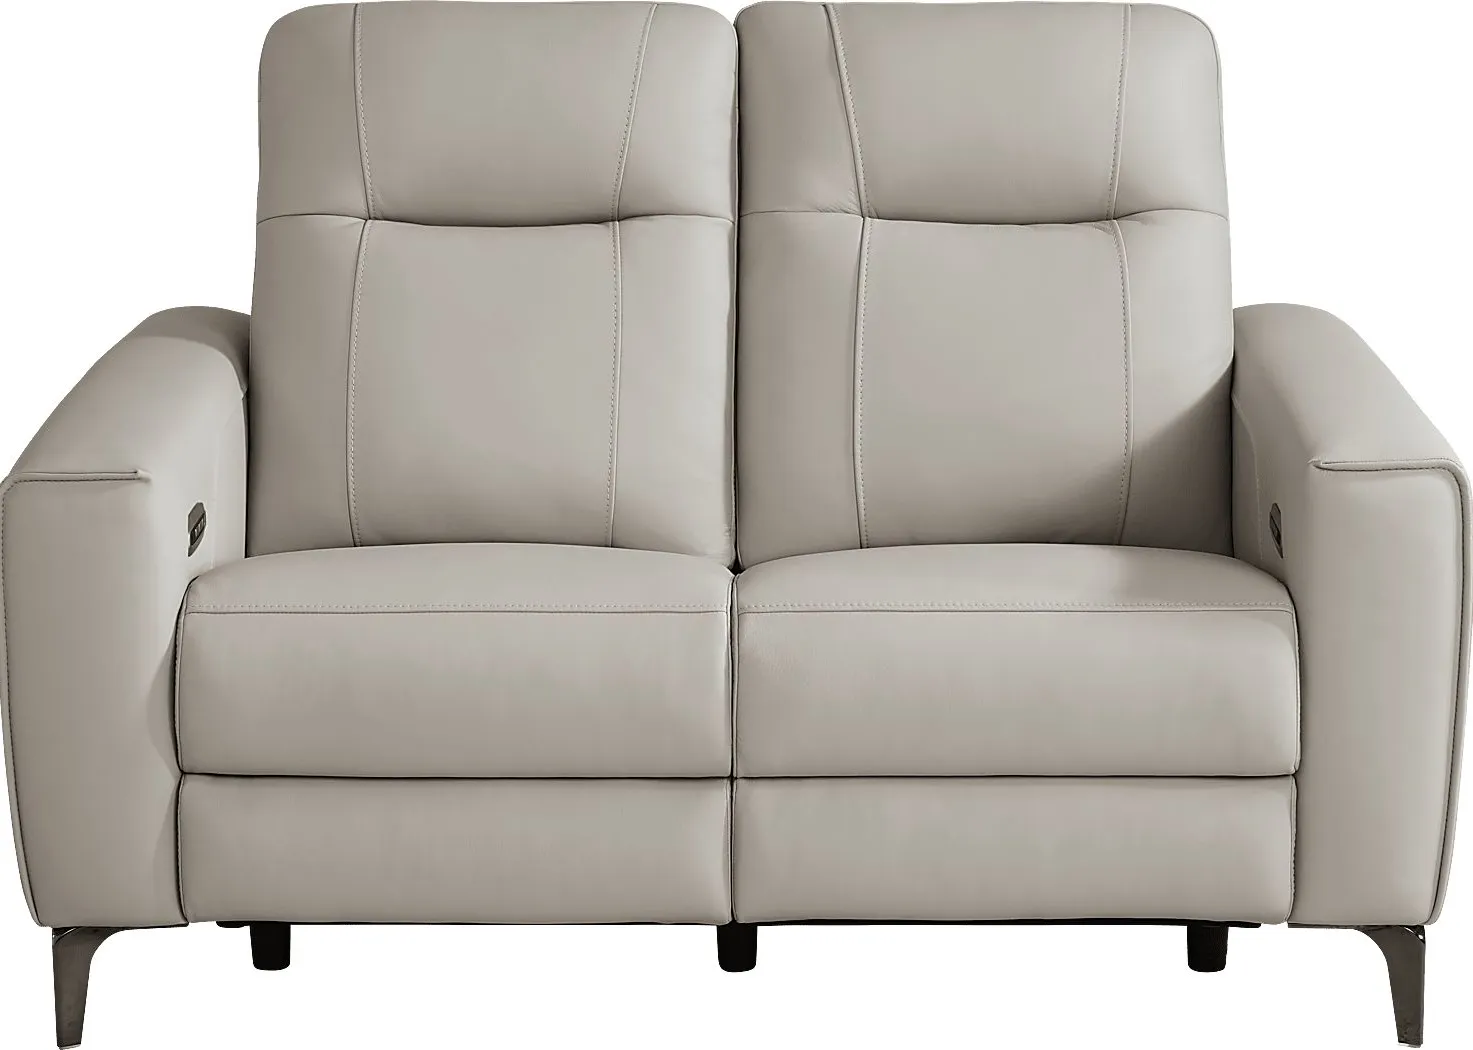 Parkside Heights Gray Leather Dual Power Reclining Loveseat